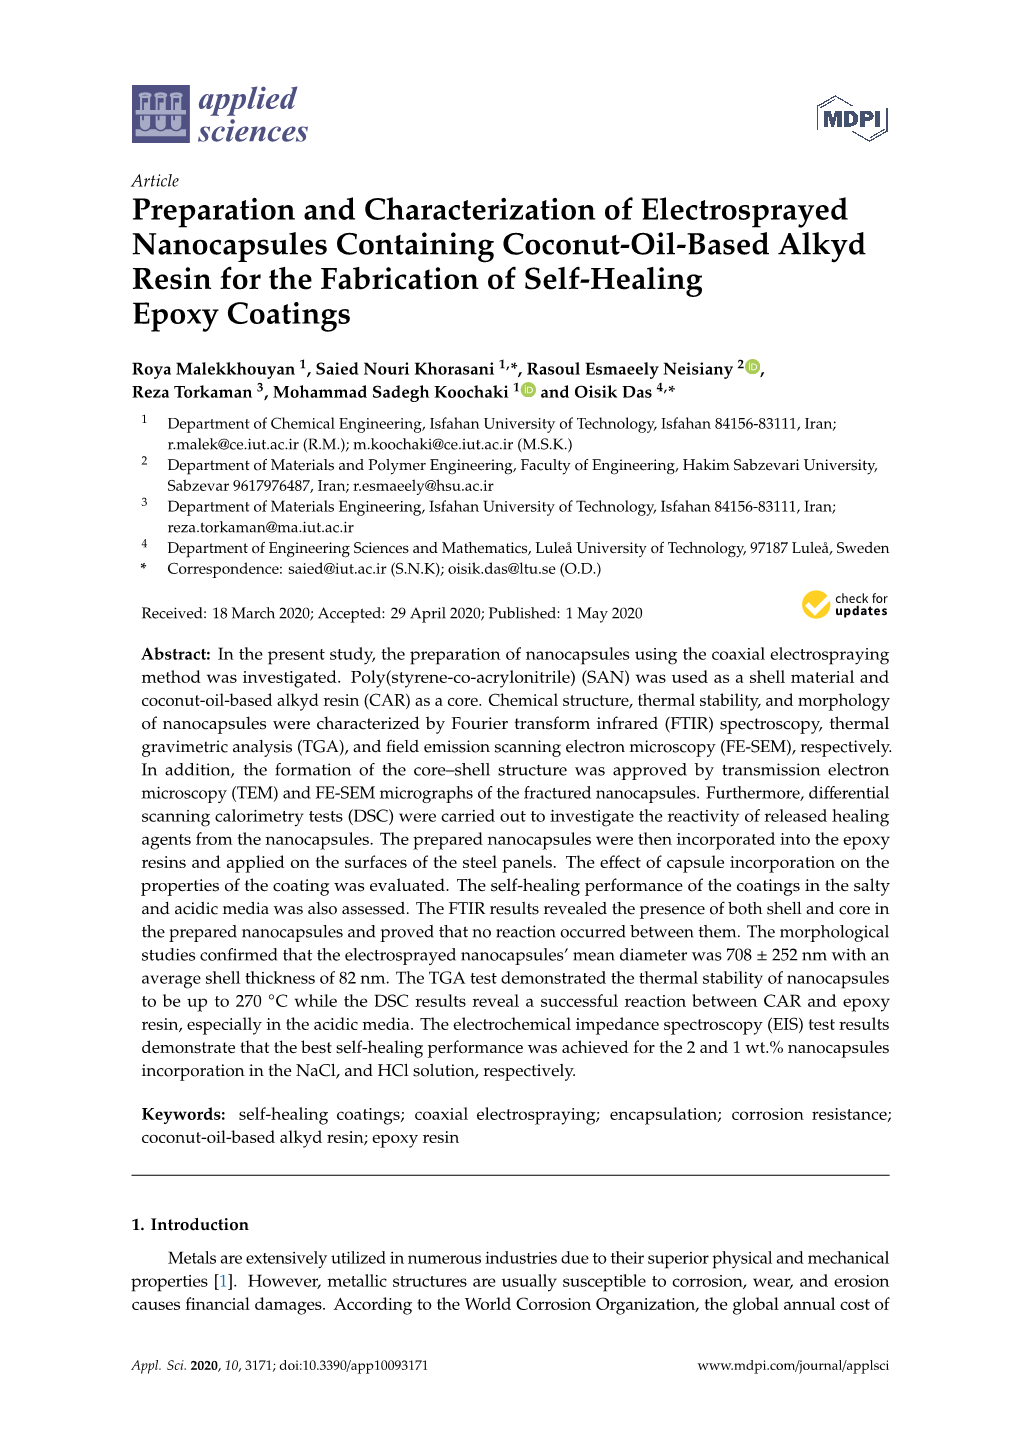 Preparation and Characterization of Electrosprayed Nanocapsules Containing Coconut-Oil-Based Alkyd Resin for the Fabrication of Self-Healing Epoxy Coatings